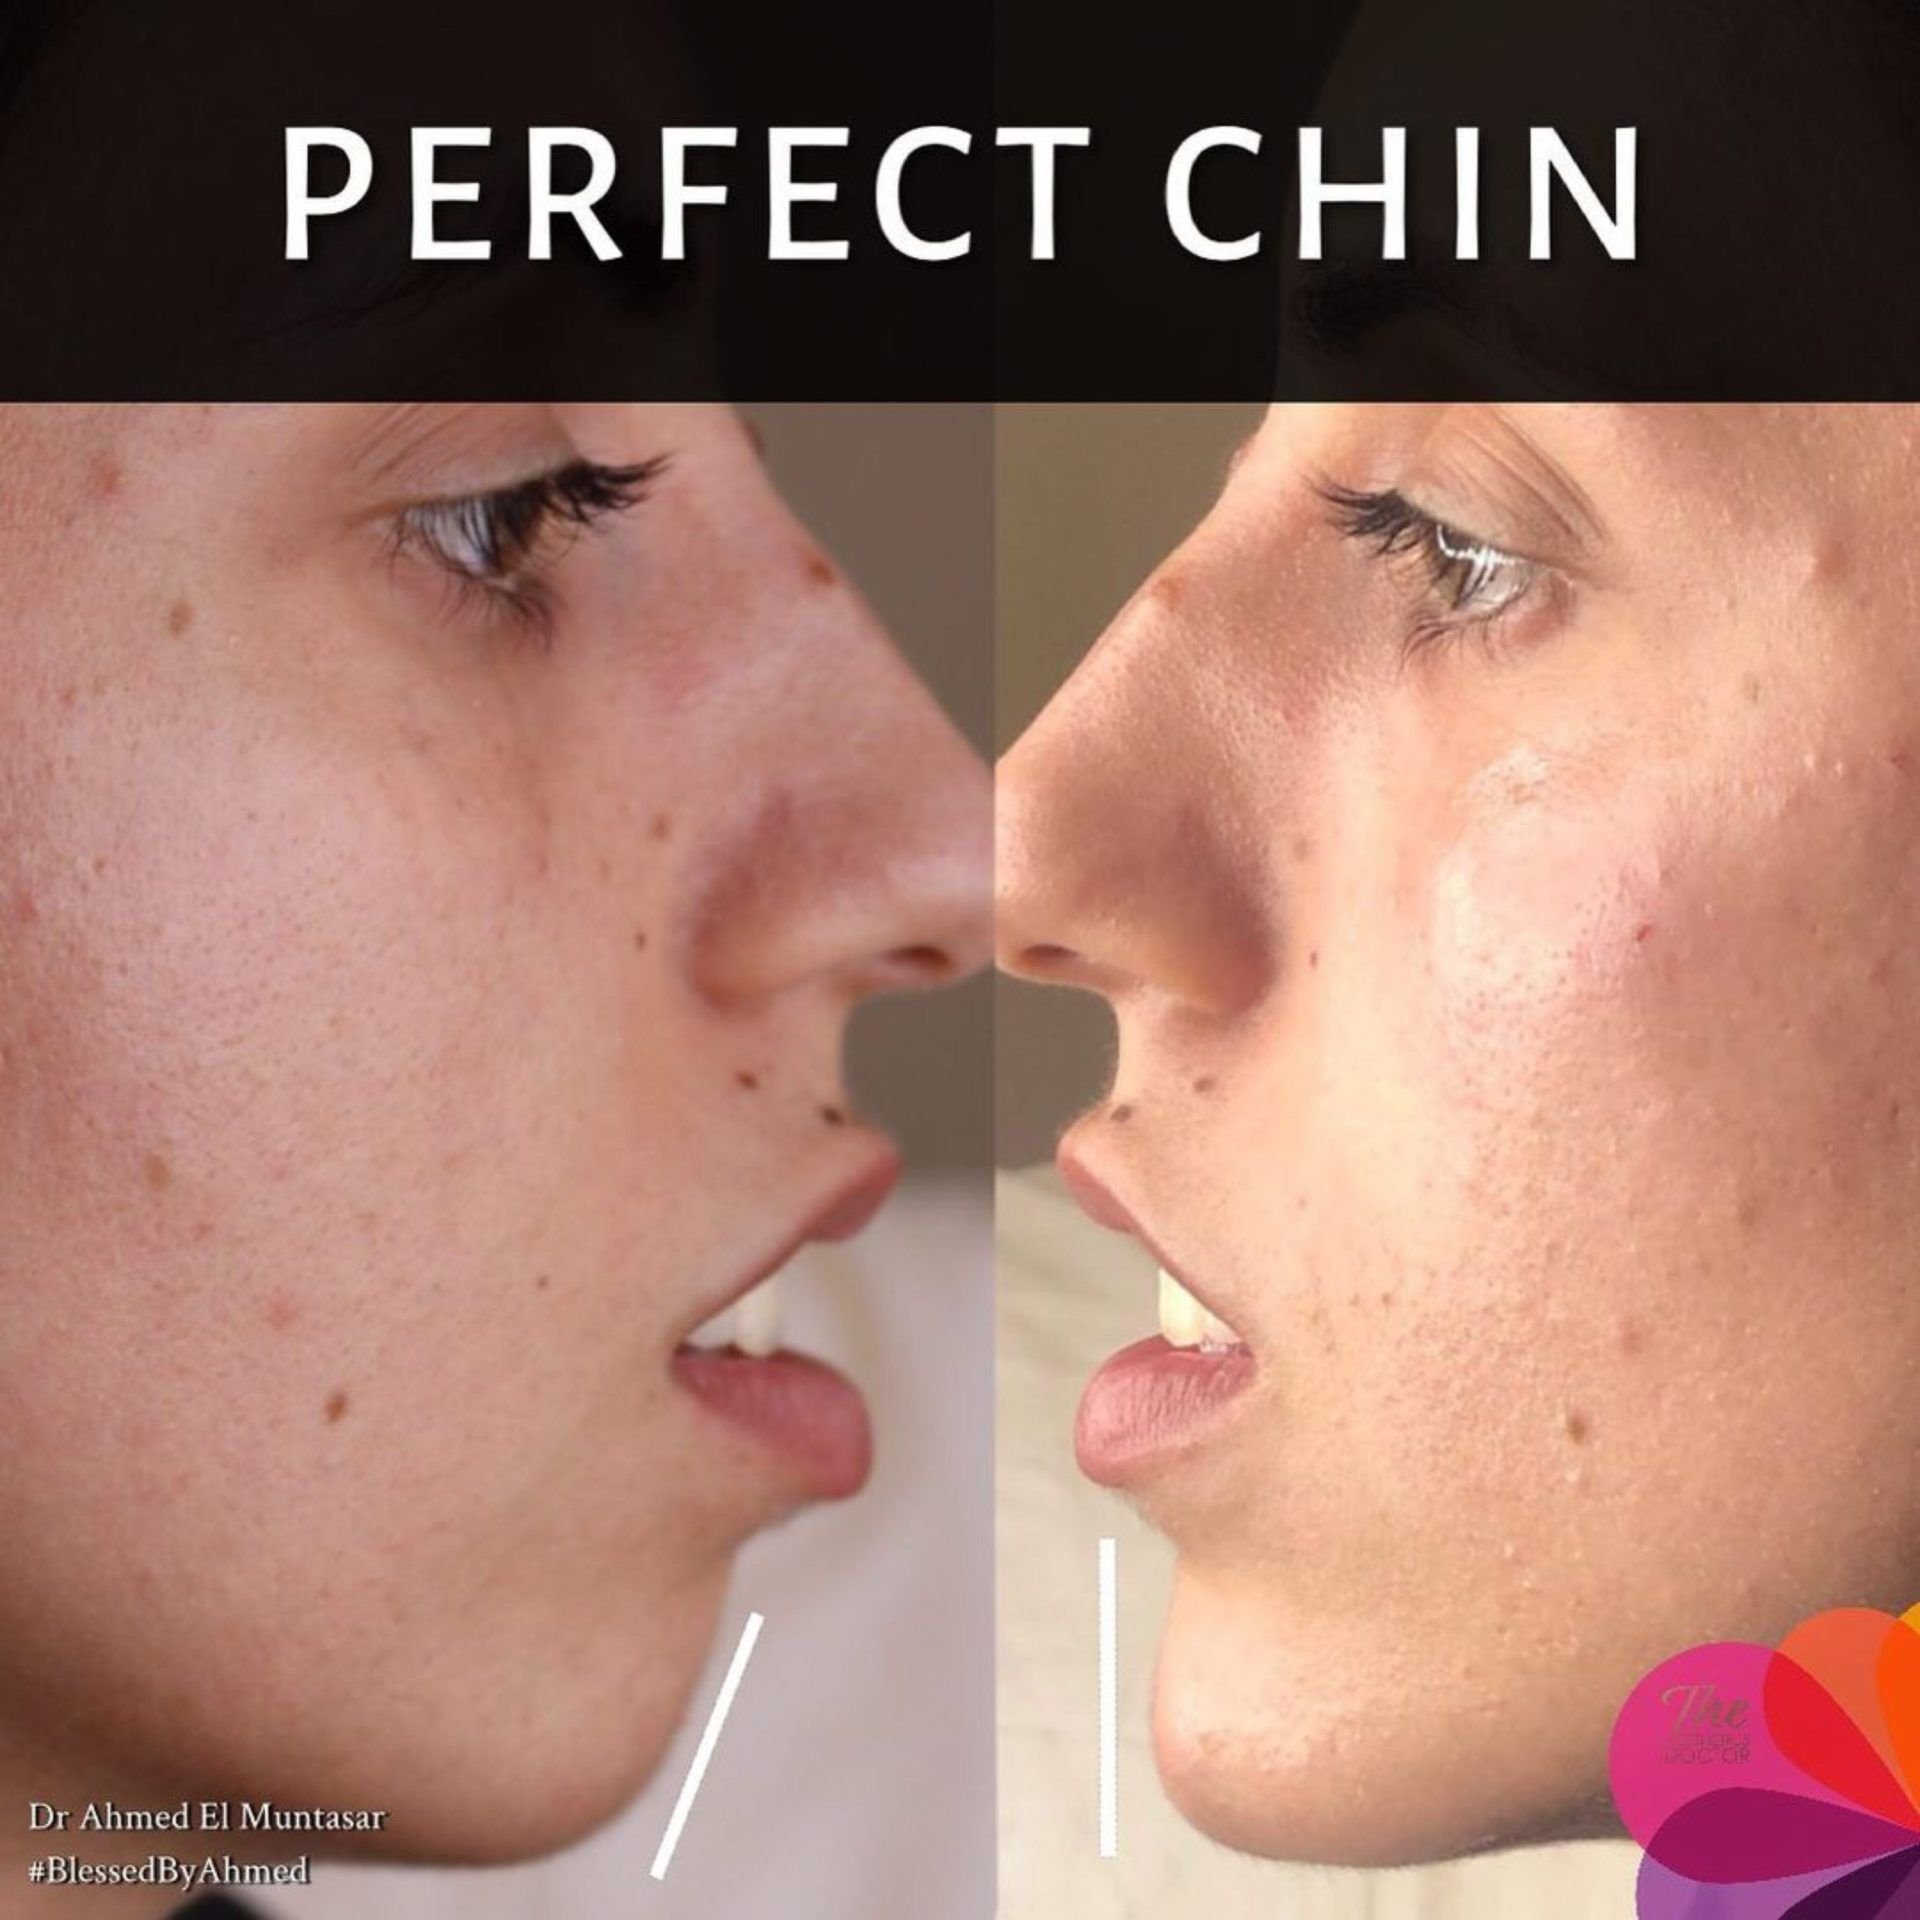 pebble chin before after